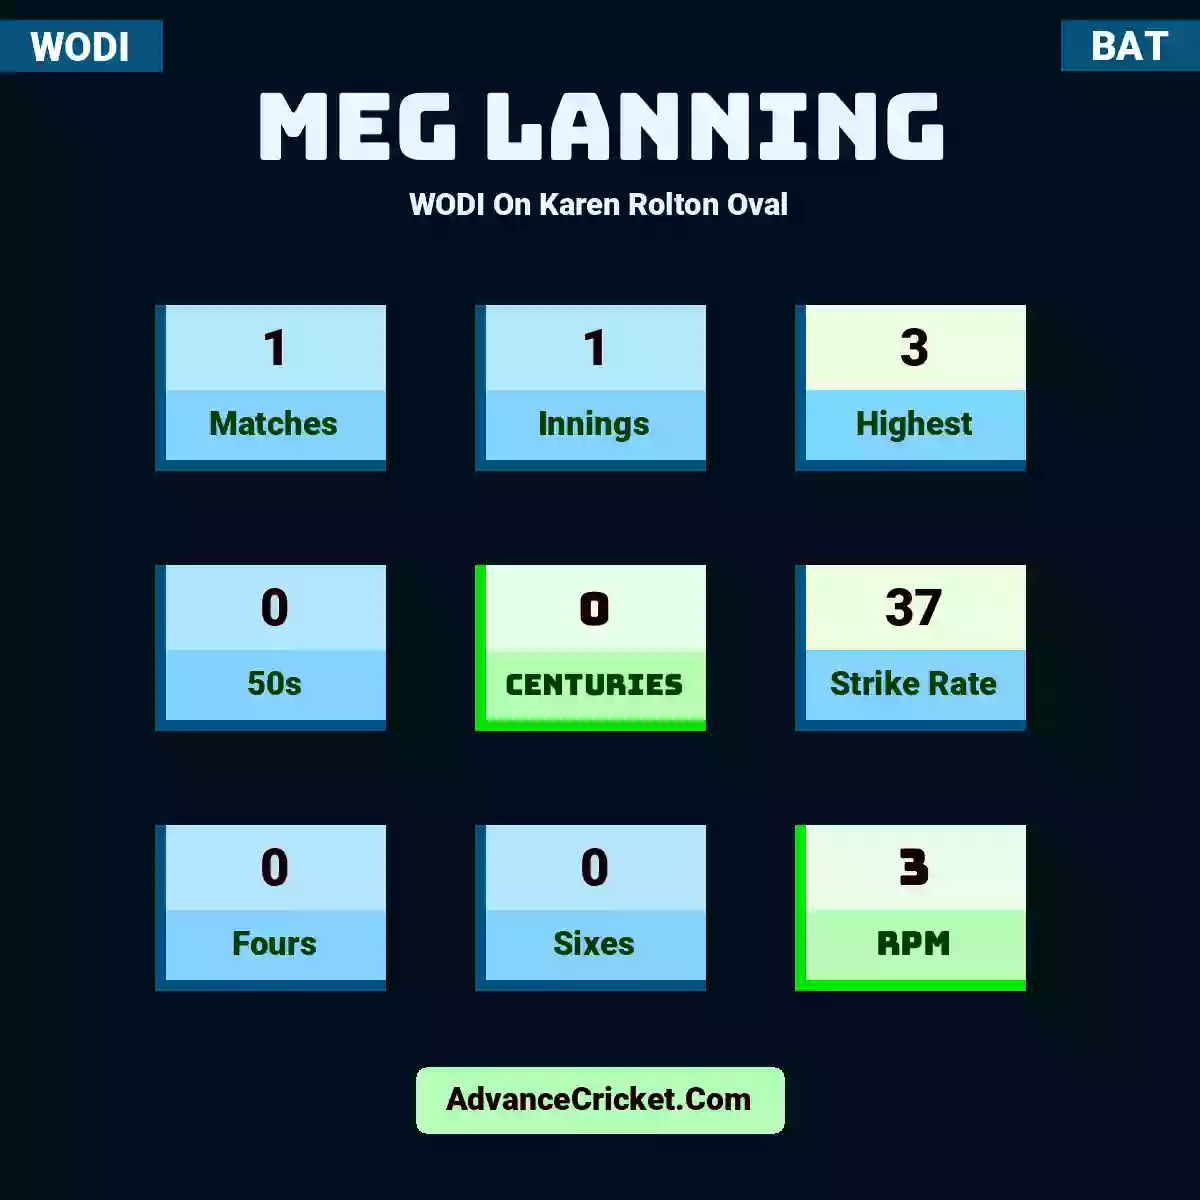 Meg Lanning WODI  On Karen Rolton Oval, Meg Lanning played 1 matches, scored 3 runs as highest, 0 half-centuries, and 0 centuries, with a strike rate of 37. M.Lanning hit 0 fours and 0 sixes, with an RPM of 3.